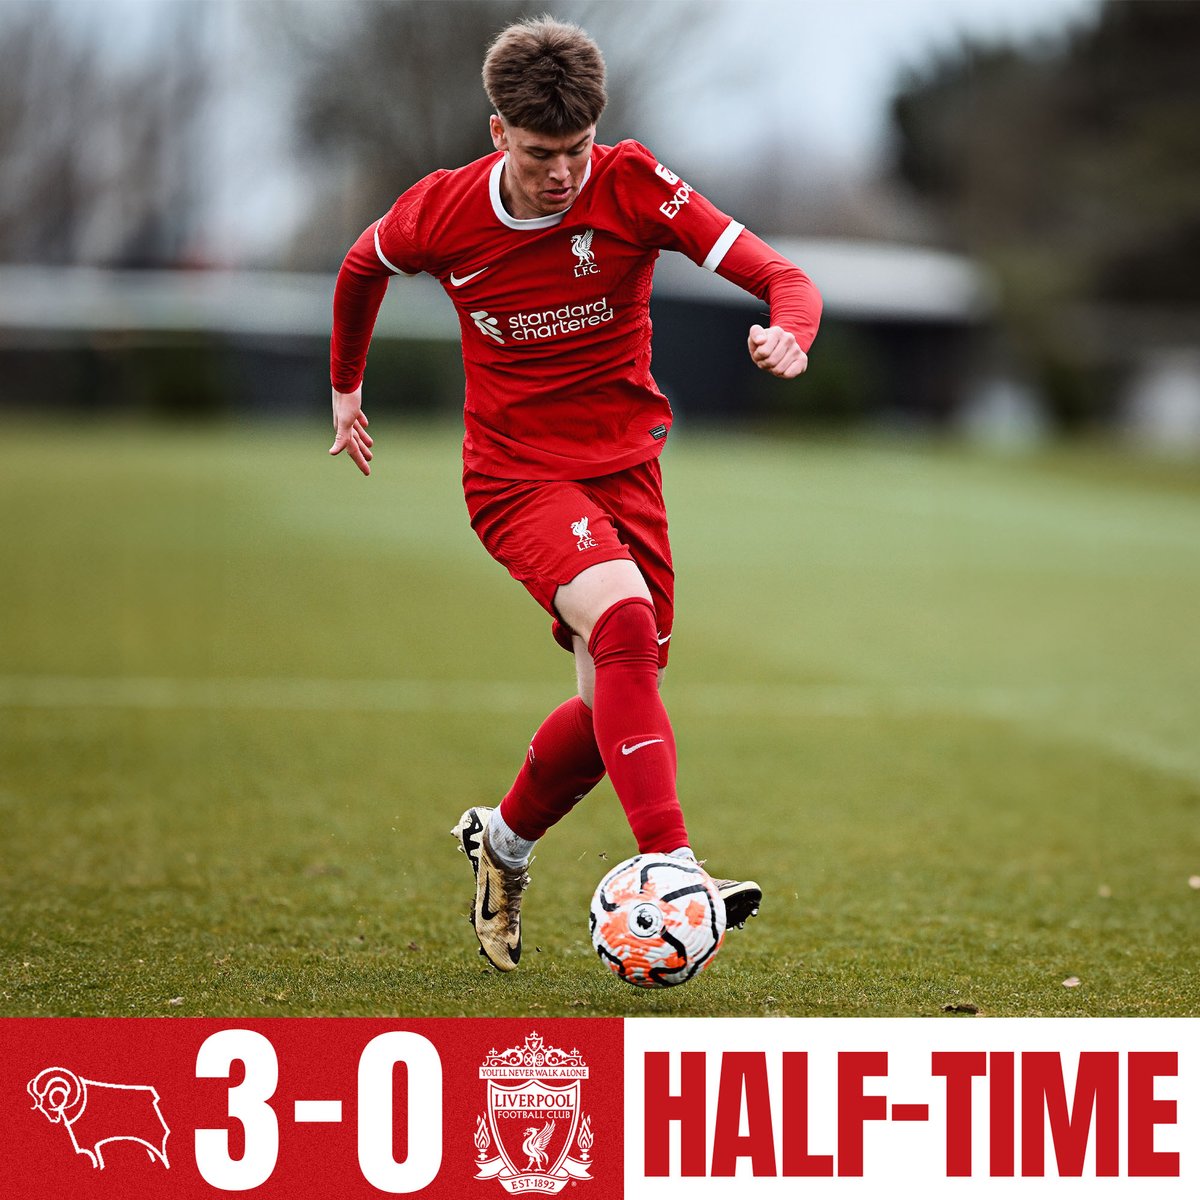 Down at the halfway point. #LFCU18s